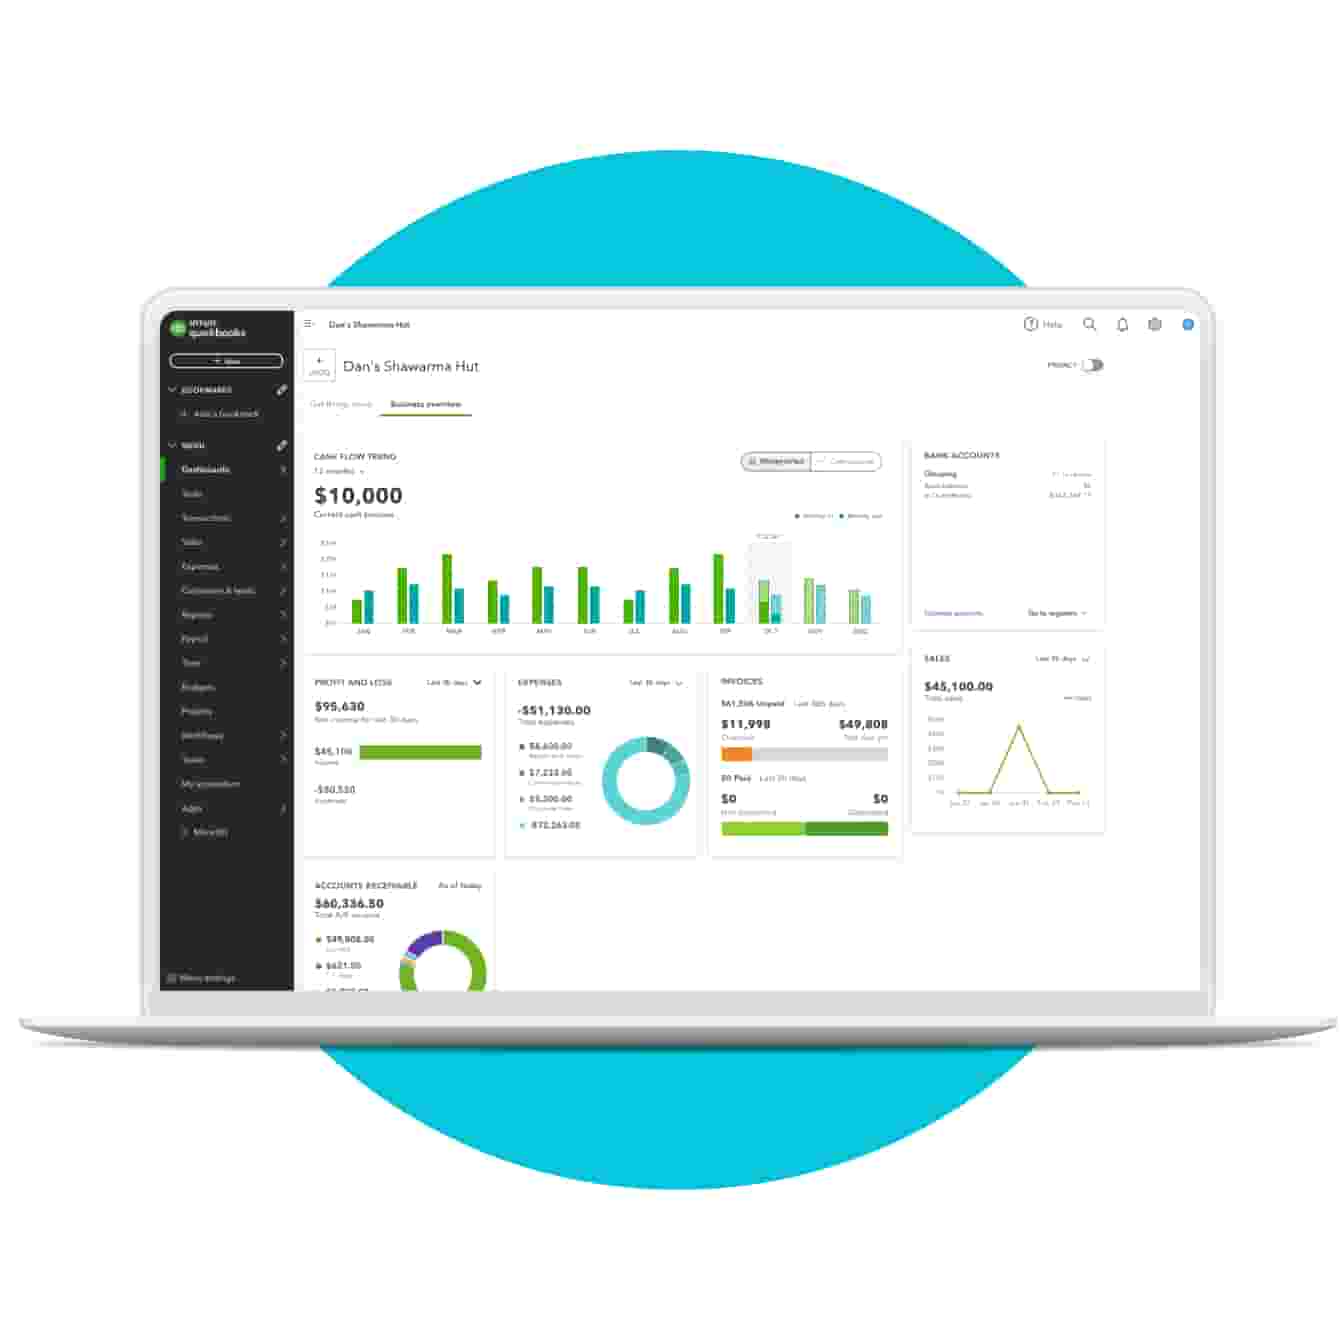 The QuickBooks Advanced dashboard showing business overview, including cash flow, expenses, profit and loss, invoices, sales, and bank accounts.